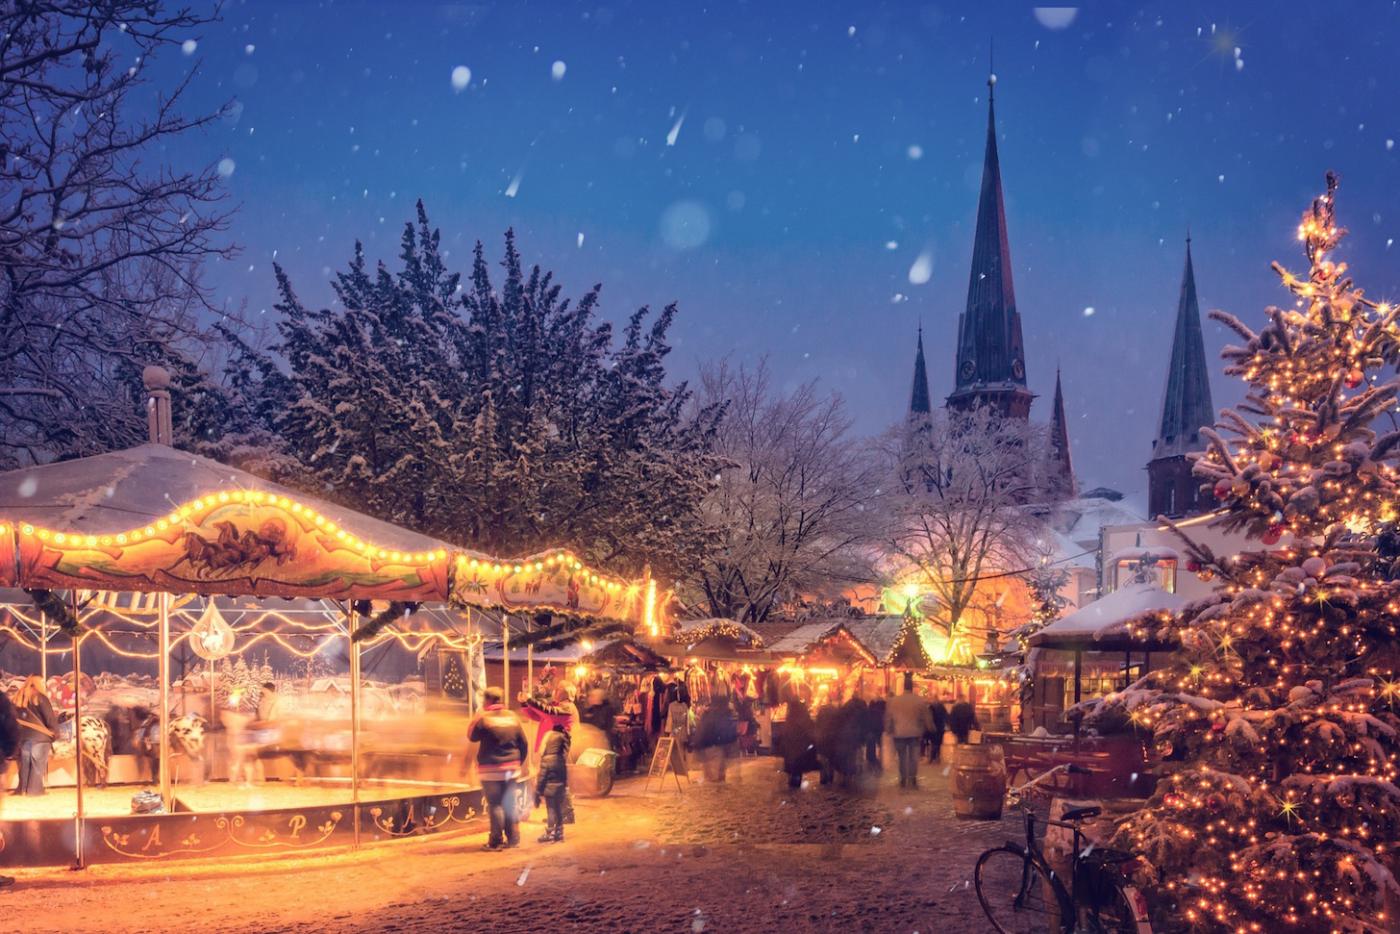 A Christmas market in Europe.